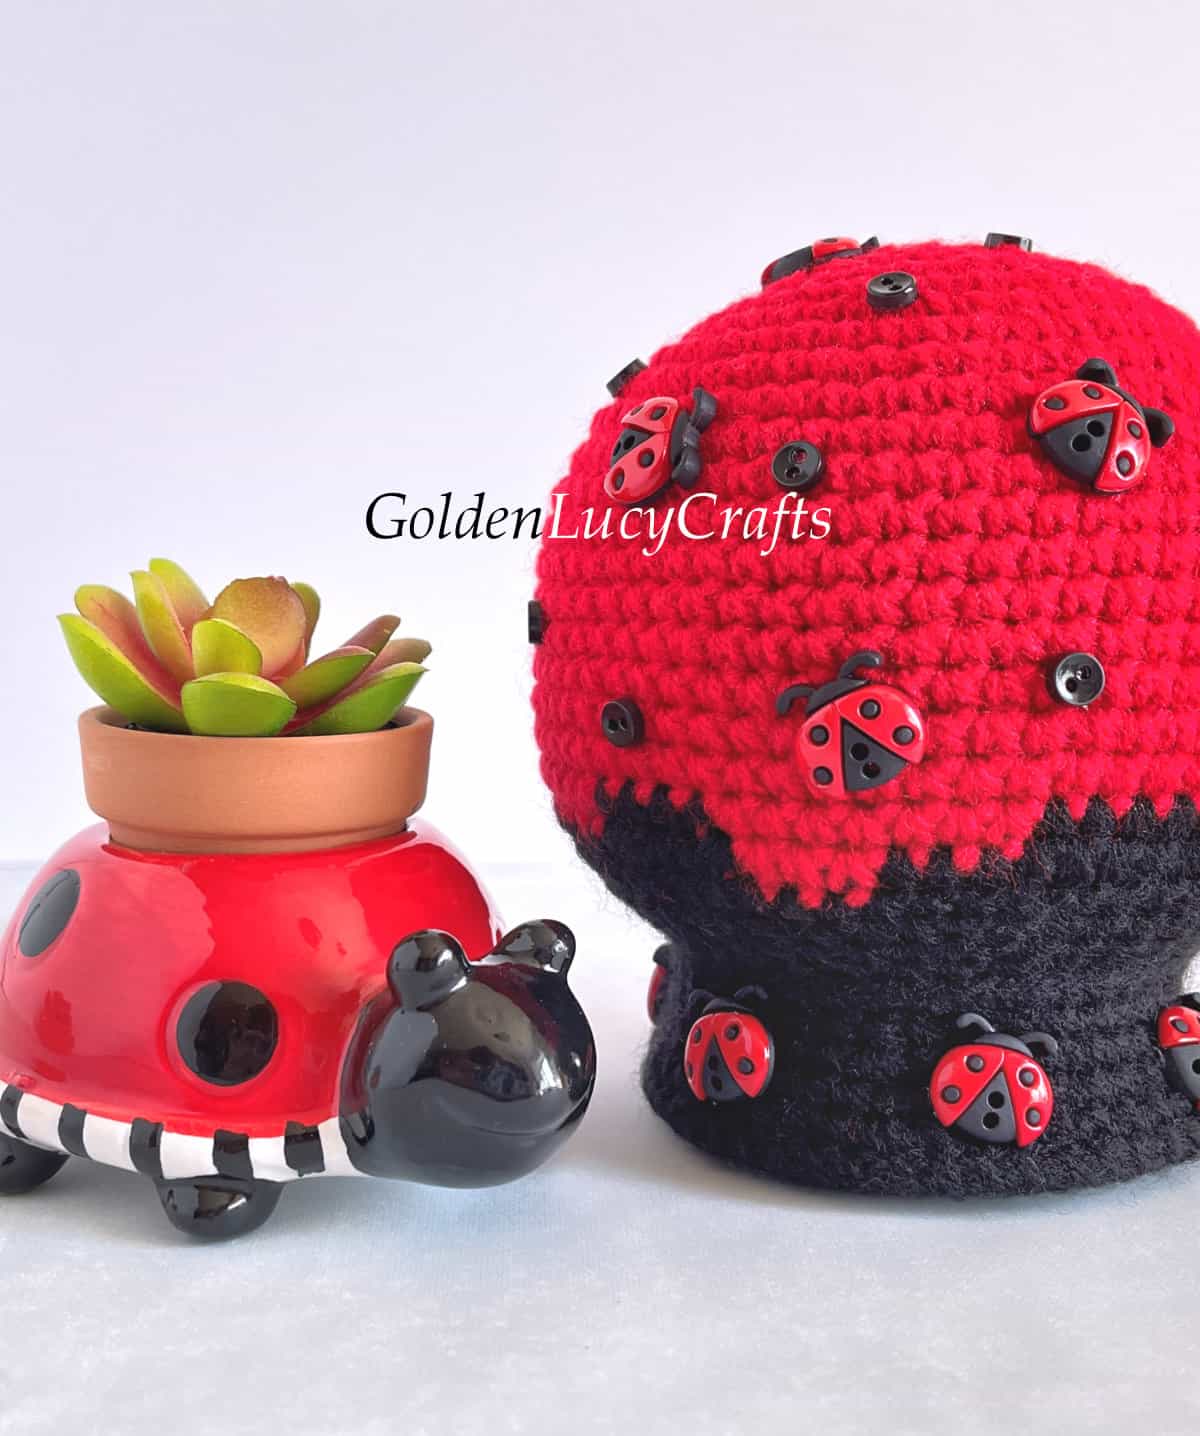 Crocheted ladybug snow globe close up picture.